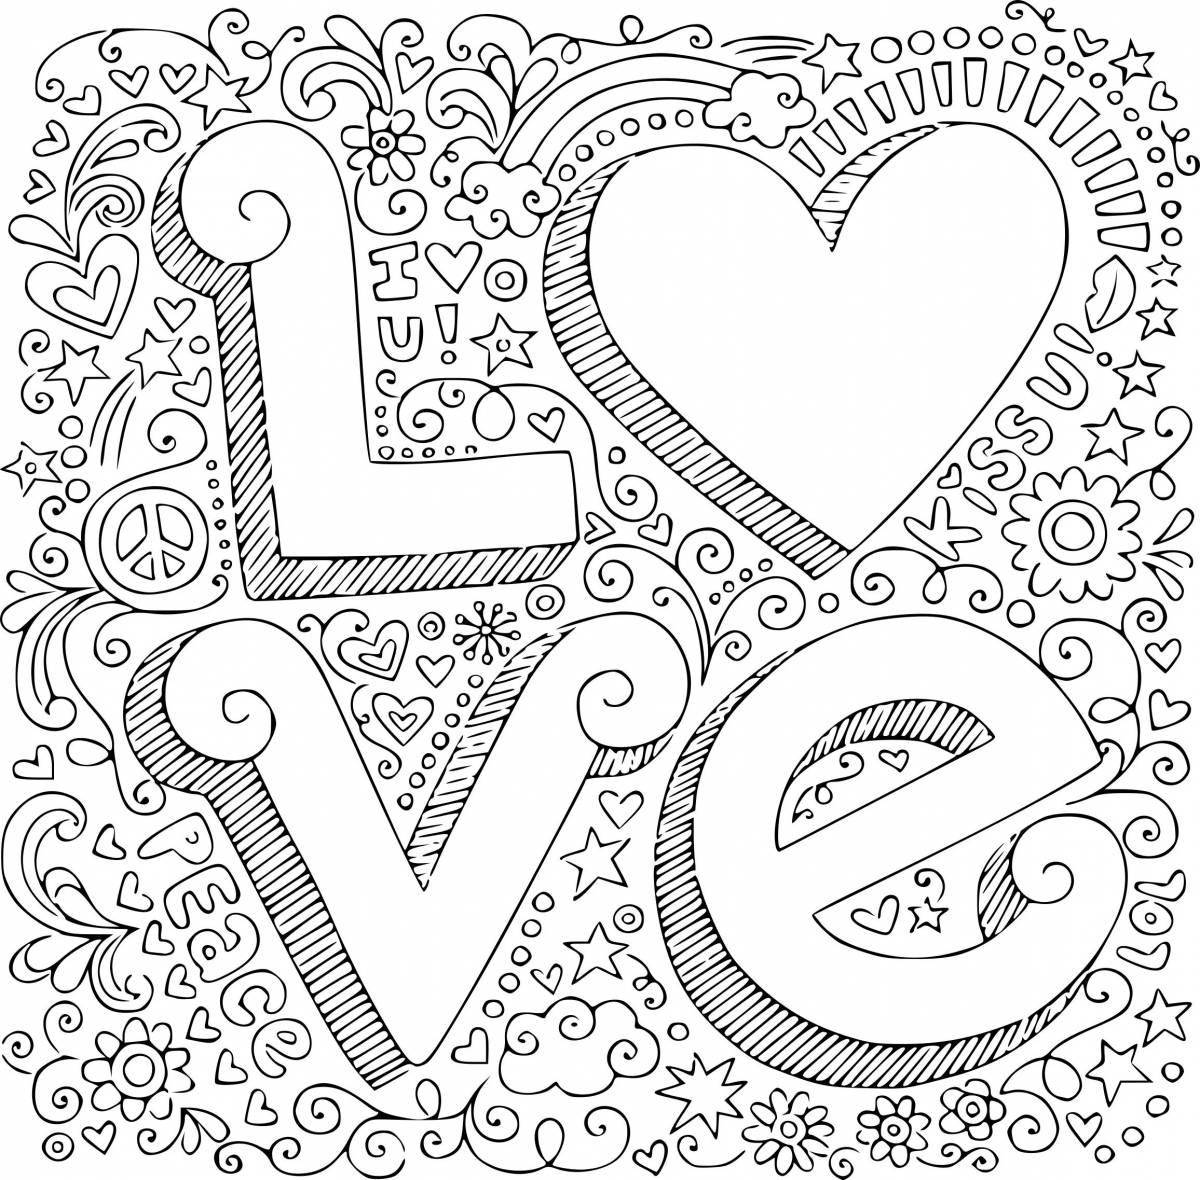 Color-frenzy 100 years coloring page